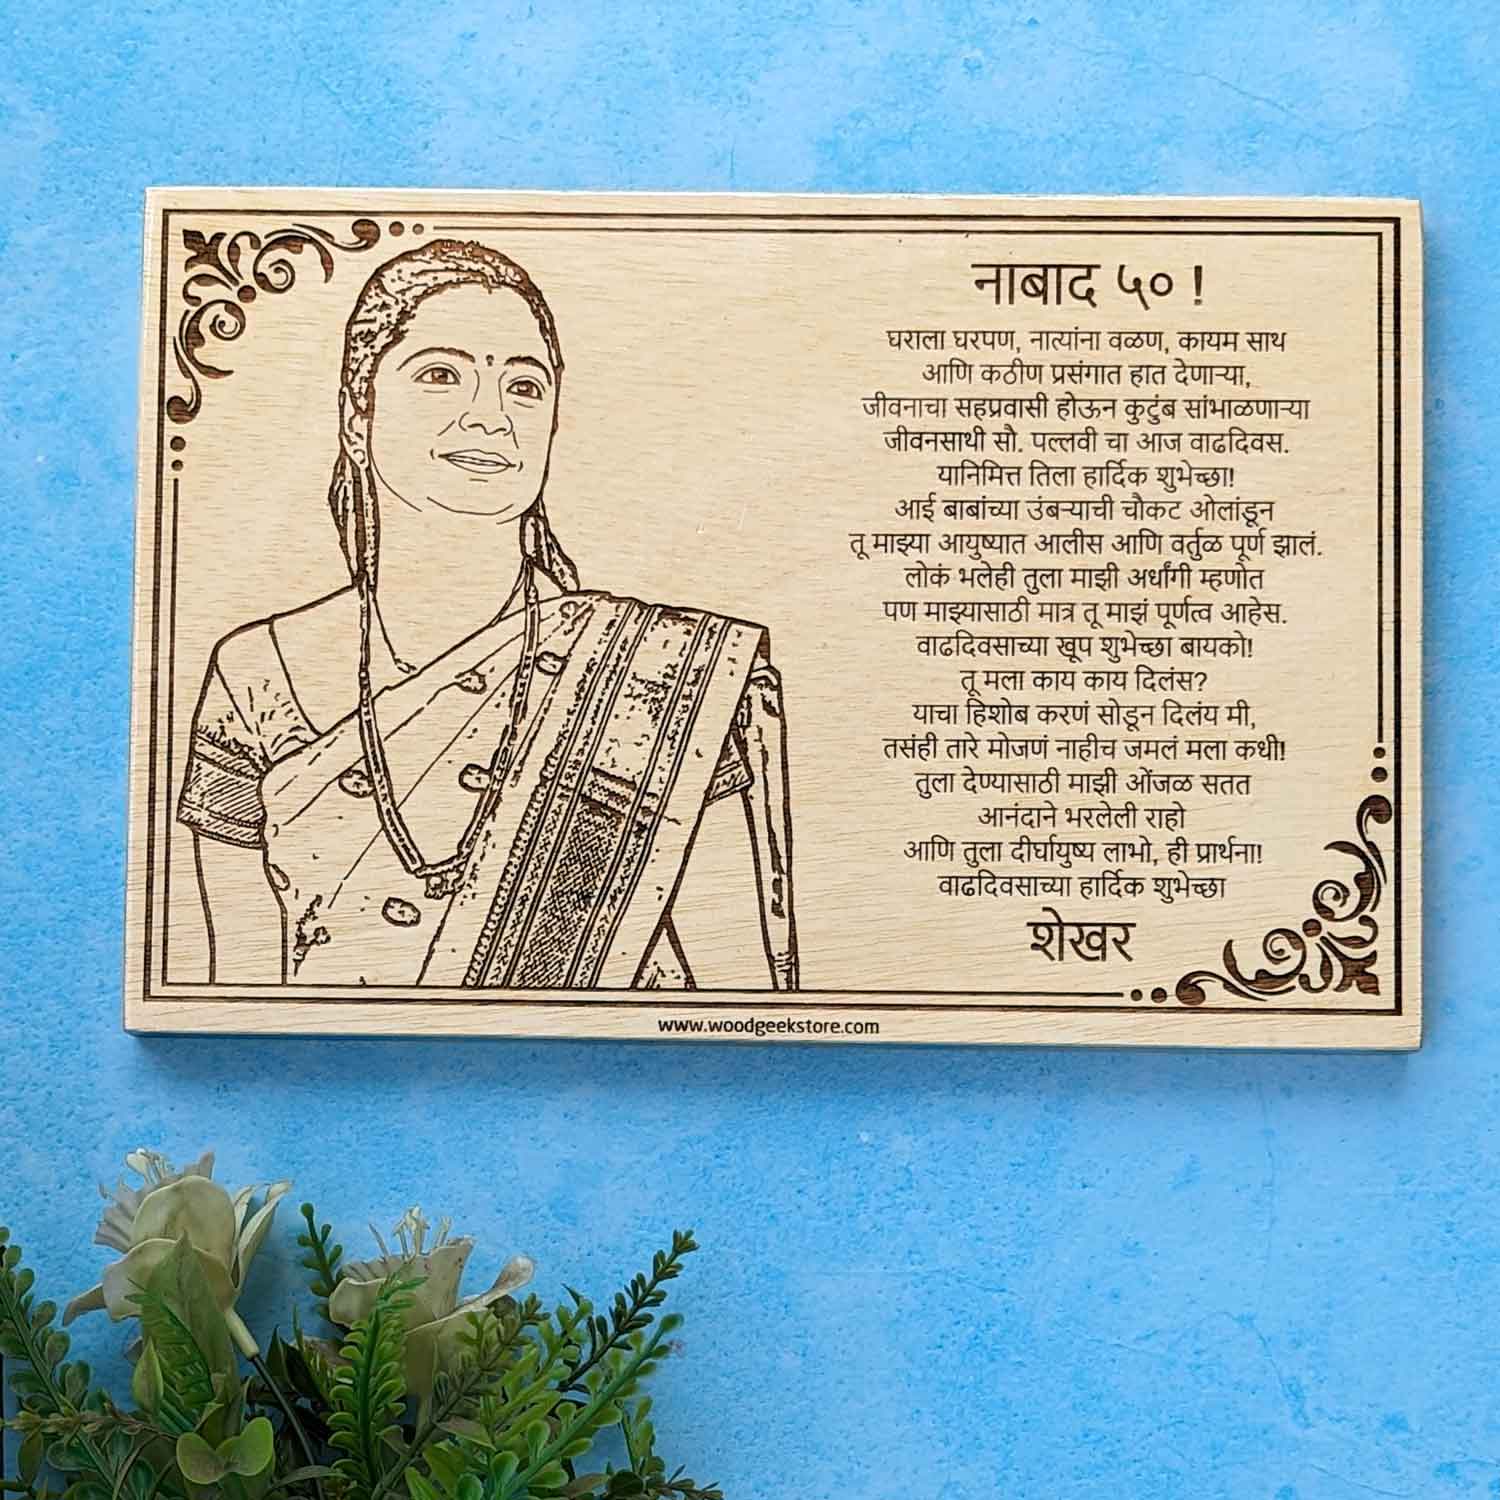 Eternal Words - Personalized Engraved Wooden Frame with Marathi Poetry